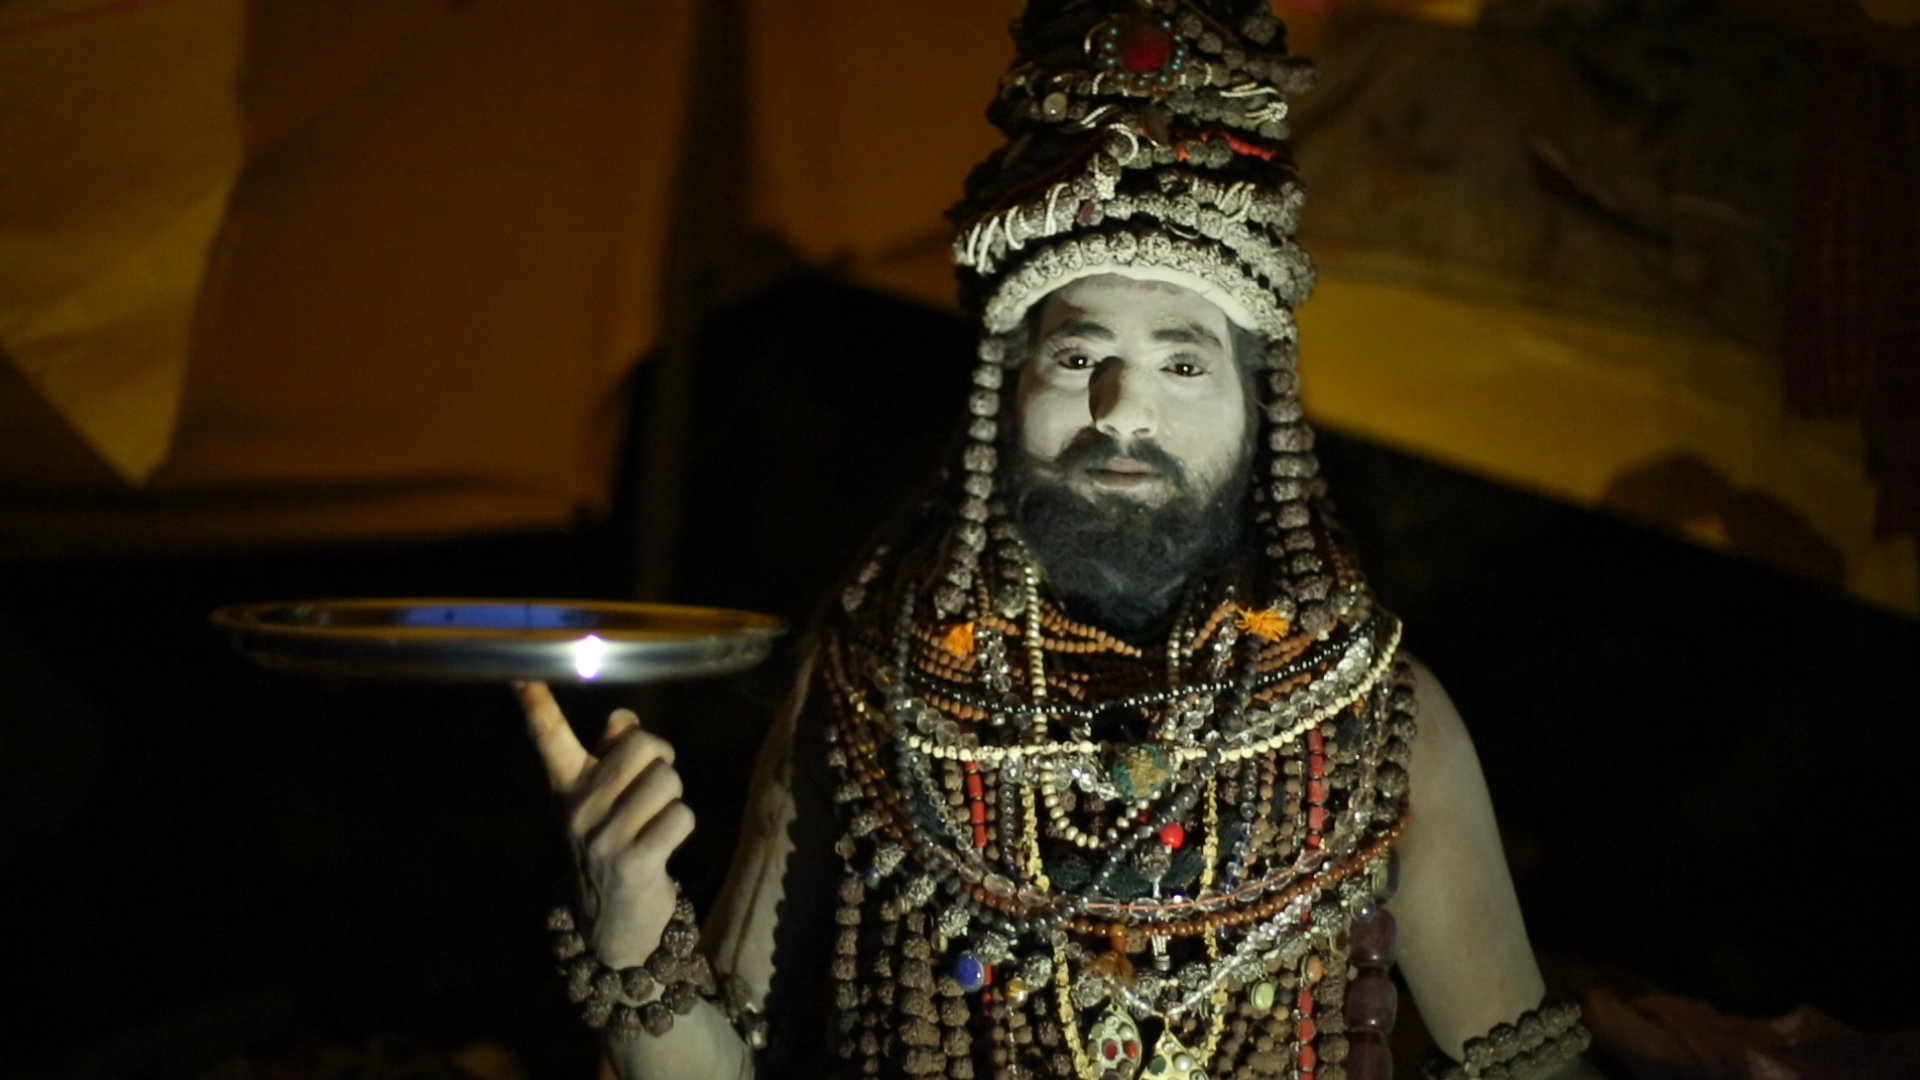 Open Road India – 9 – Kumbh ‘The Foot Soldiers’ (Nasik)